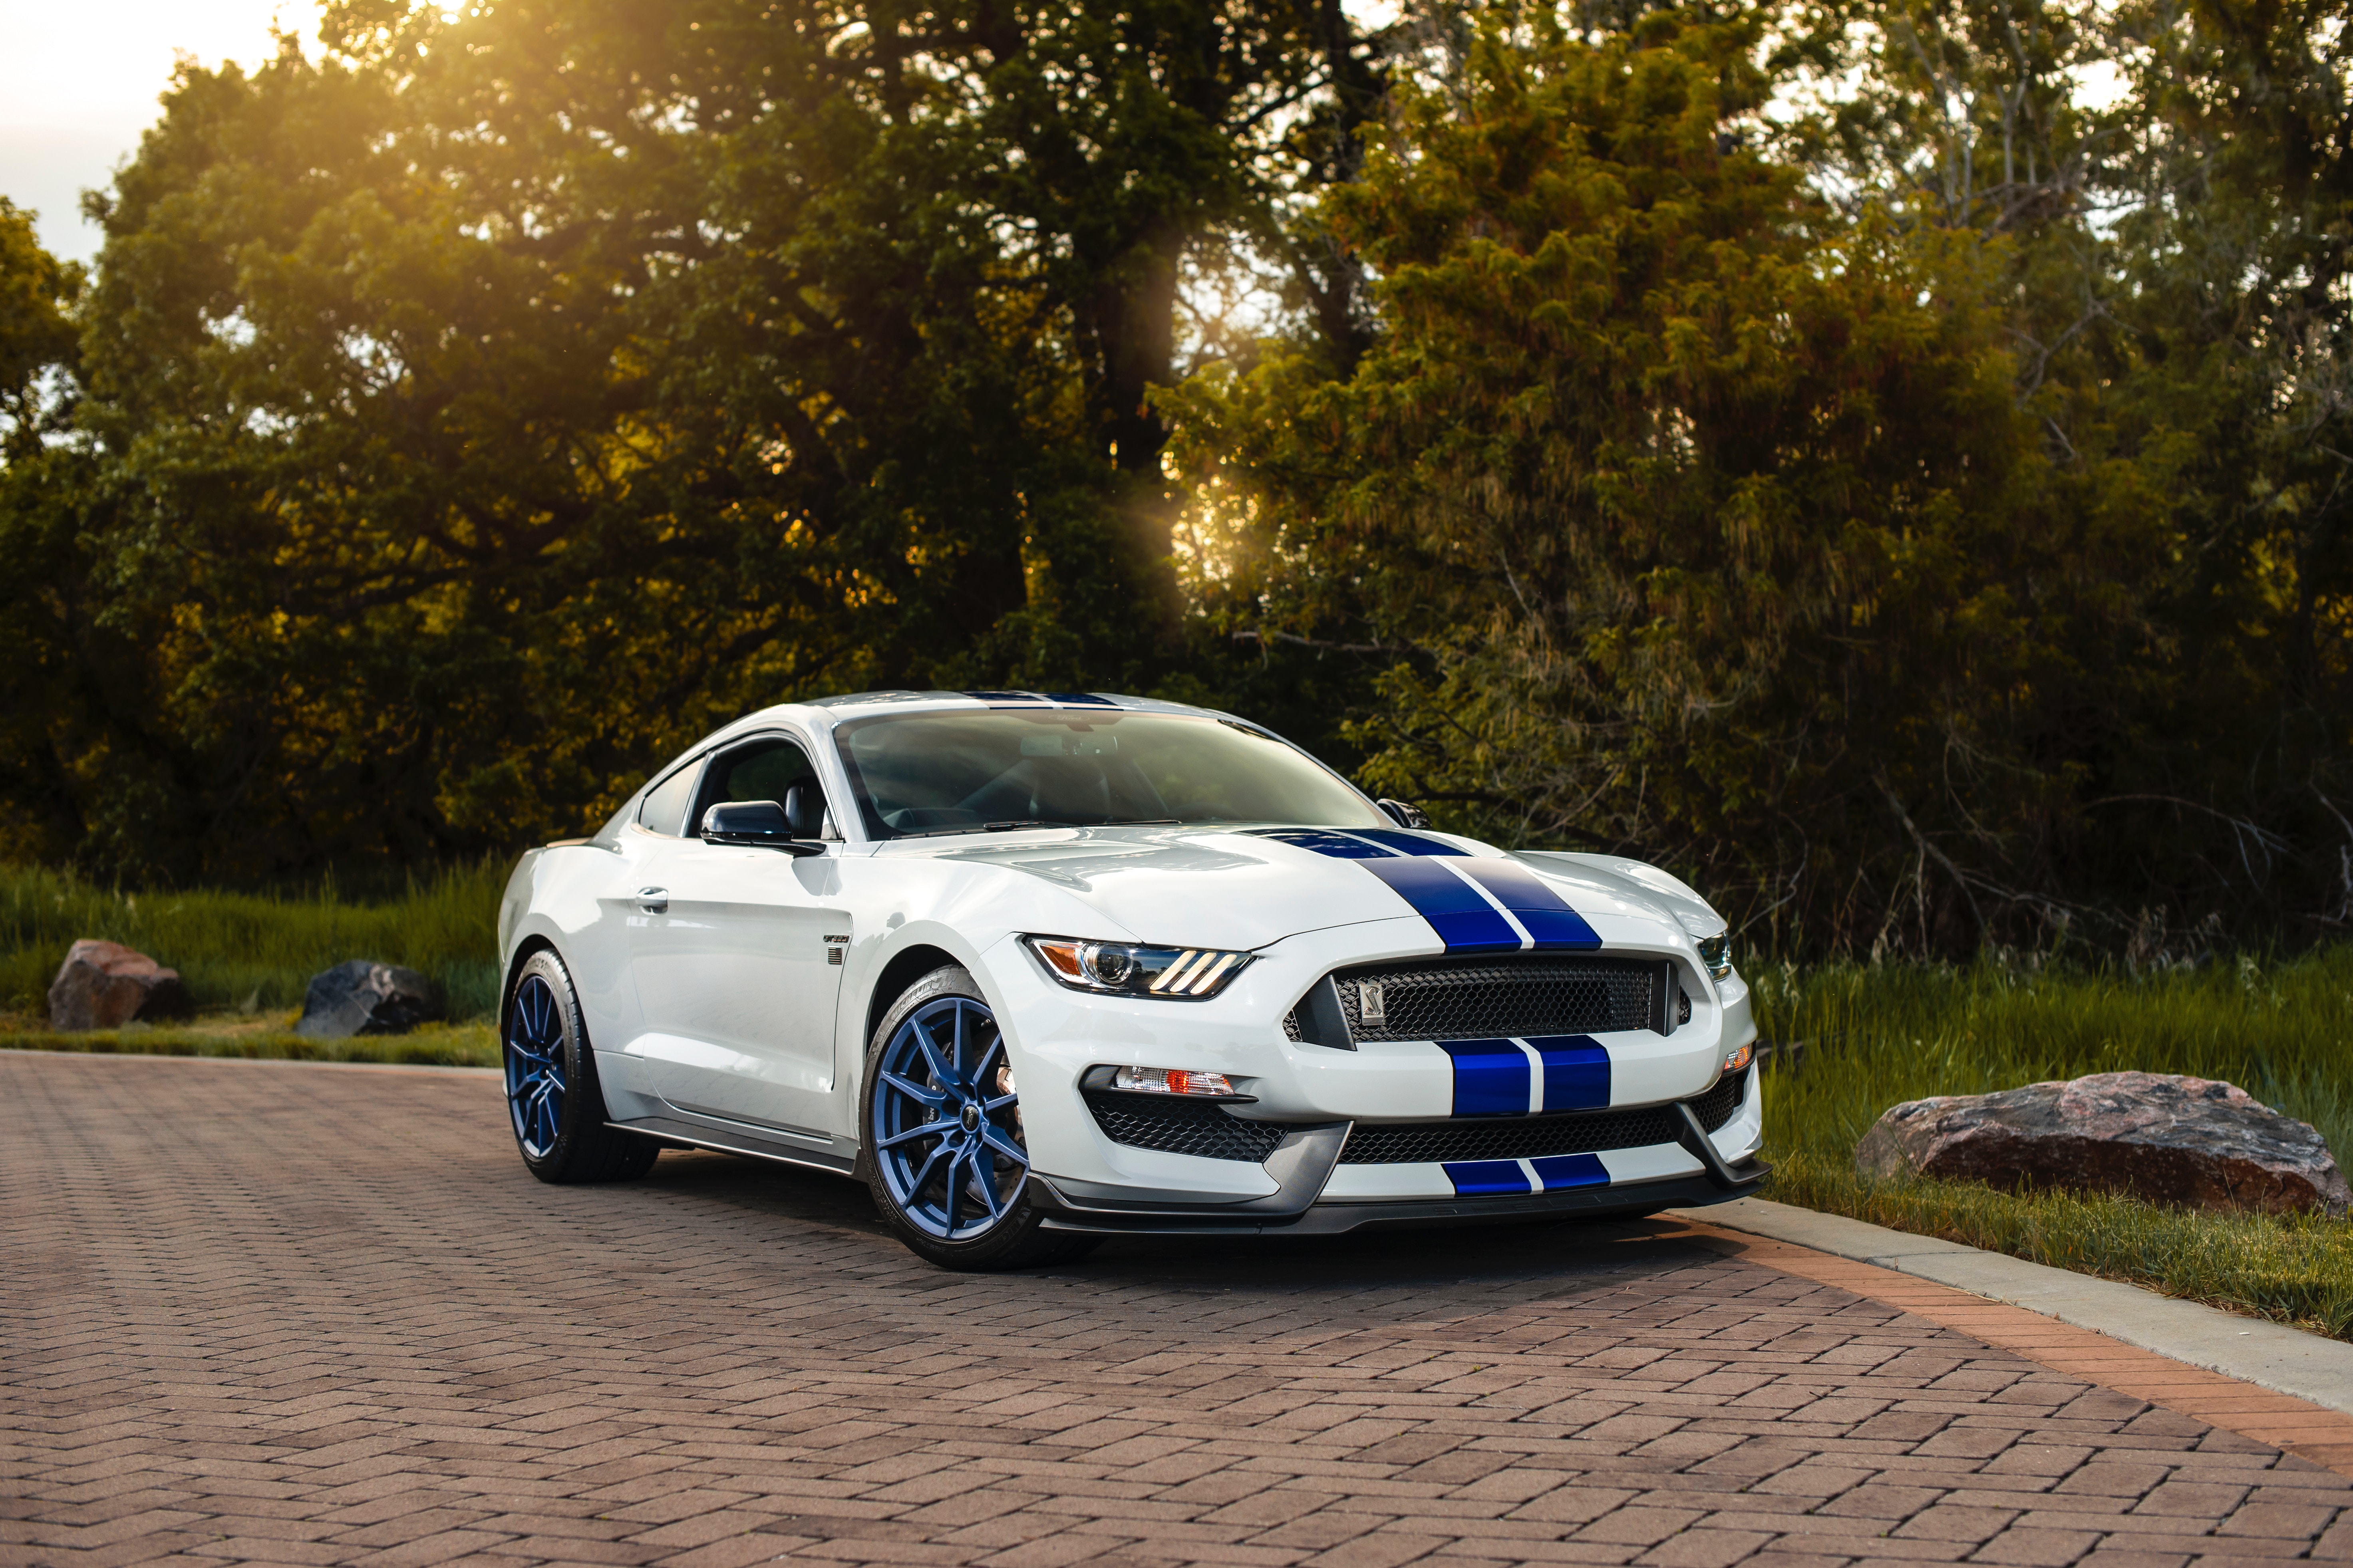 HD wallpaper car, sports, ford, cars, white, machine, sports car, side view, ford mustang gt350